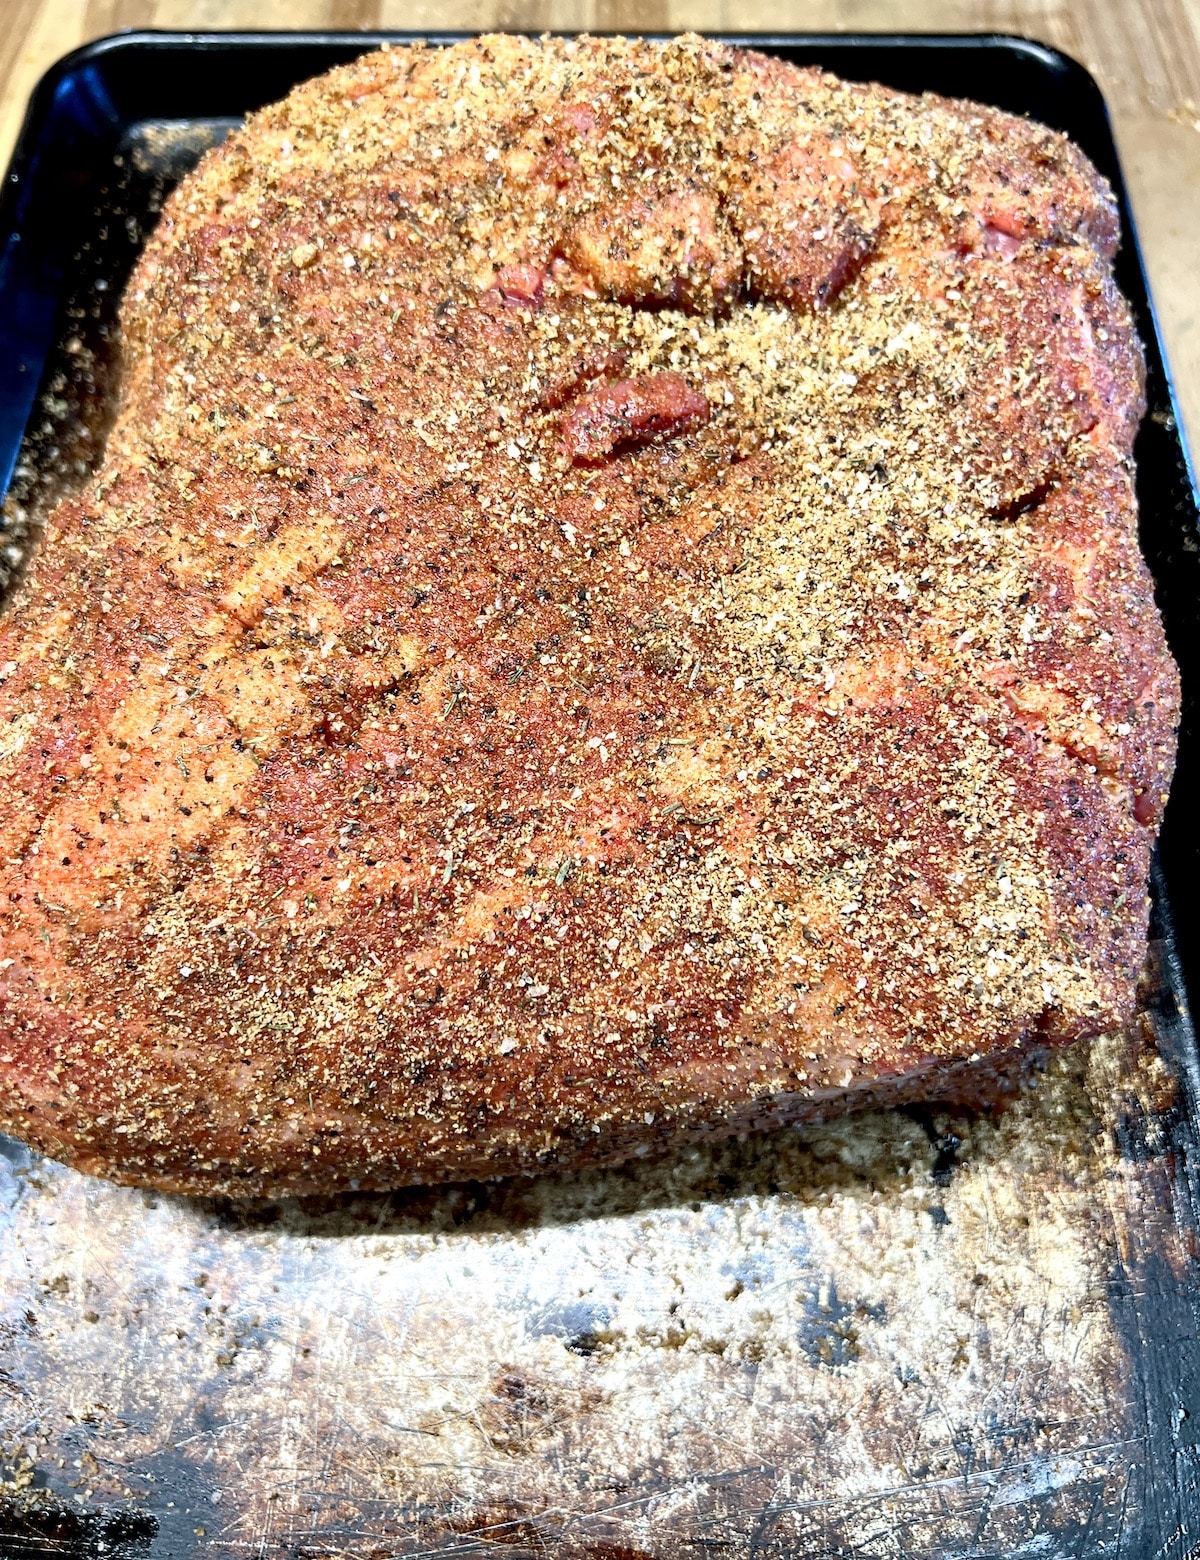 Pork butt with dry rub on a sheet pan ready to grill.